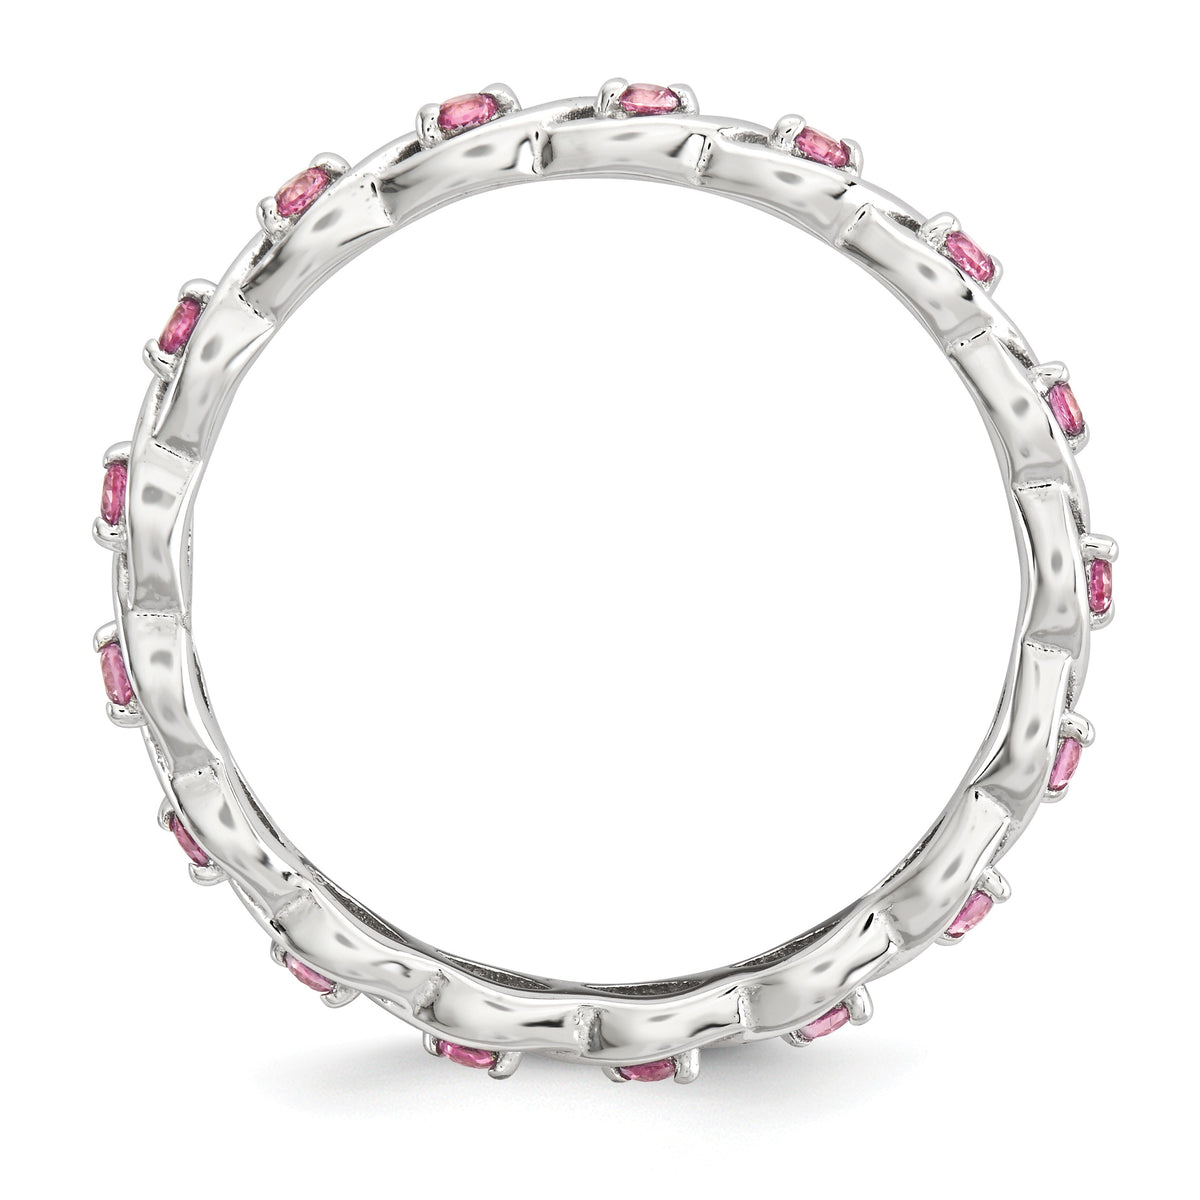 Alternate view of the 2.5mm Rhodium Sterling Silver Stackable Cr. Pink Sapphire Twist Band by The Black Bow Jewelry Co.